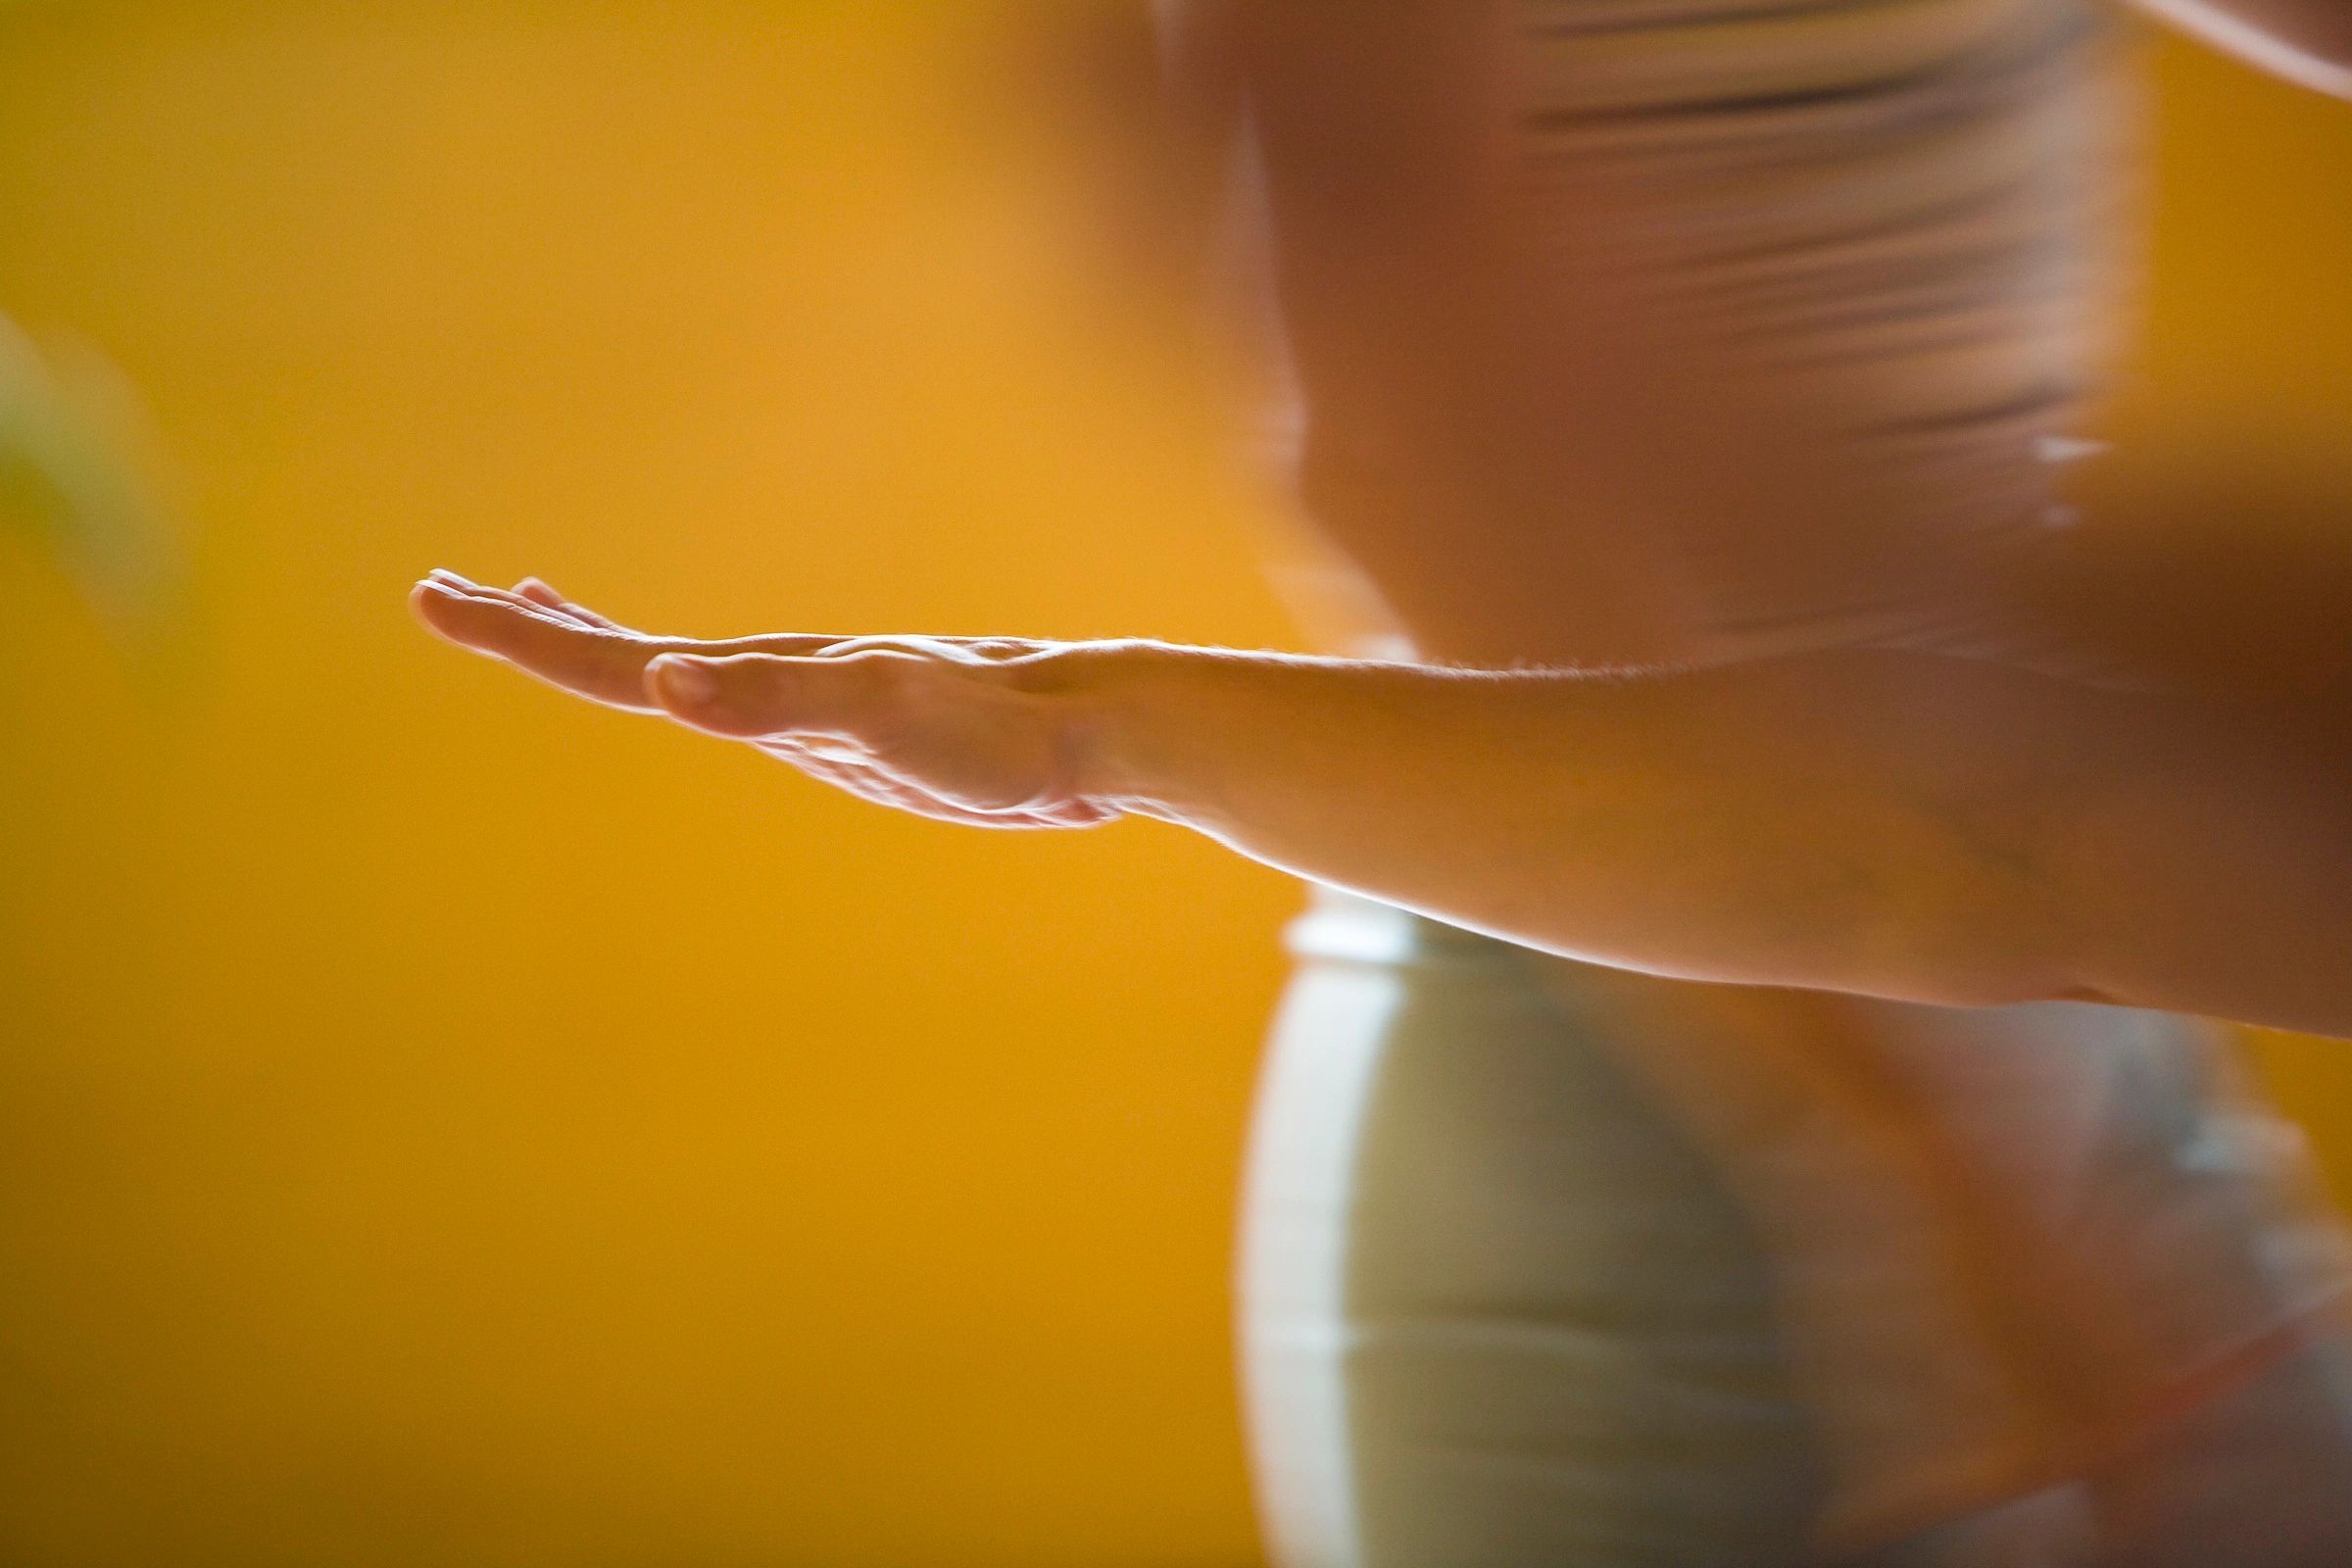 close-up of someone's arm in a yoga pose